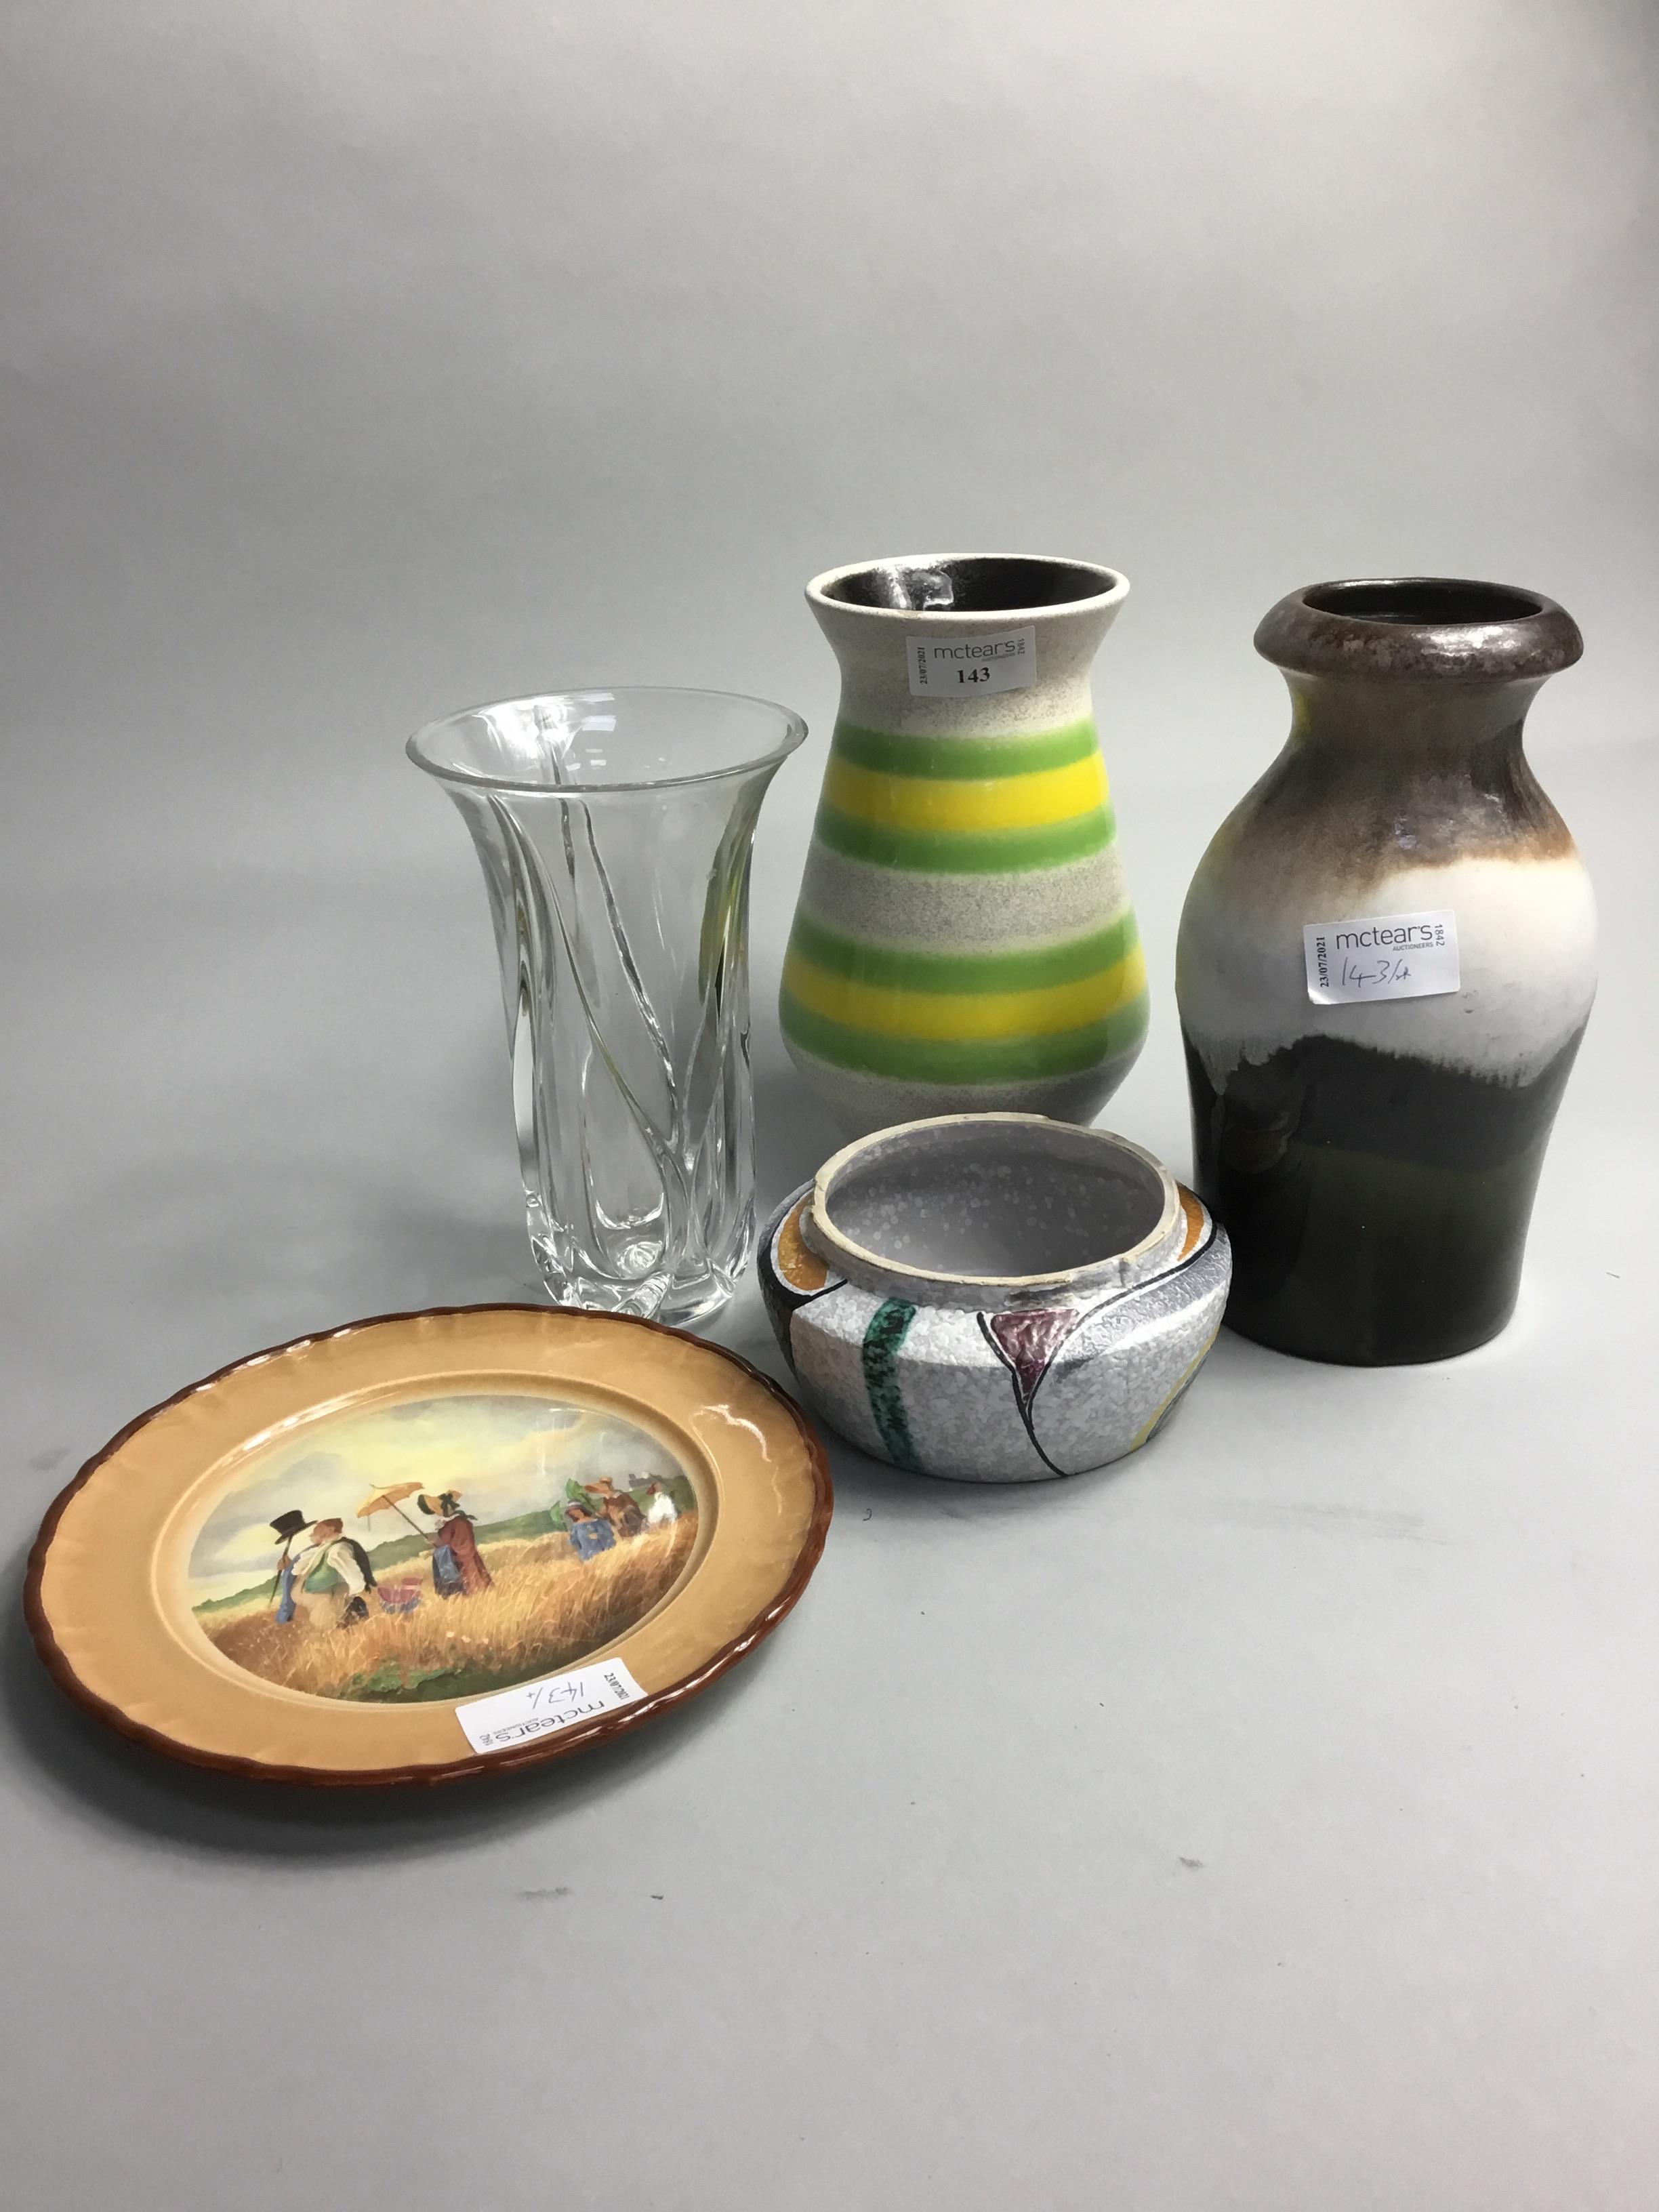 A WEST GERMAN POTTERY VASE AND OTHER CERAMICS